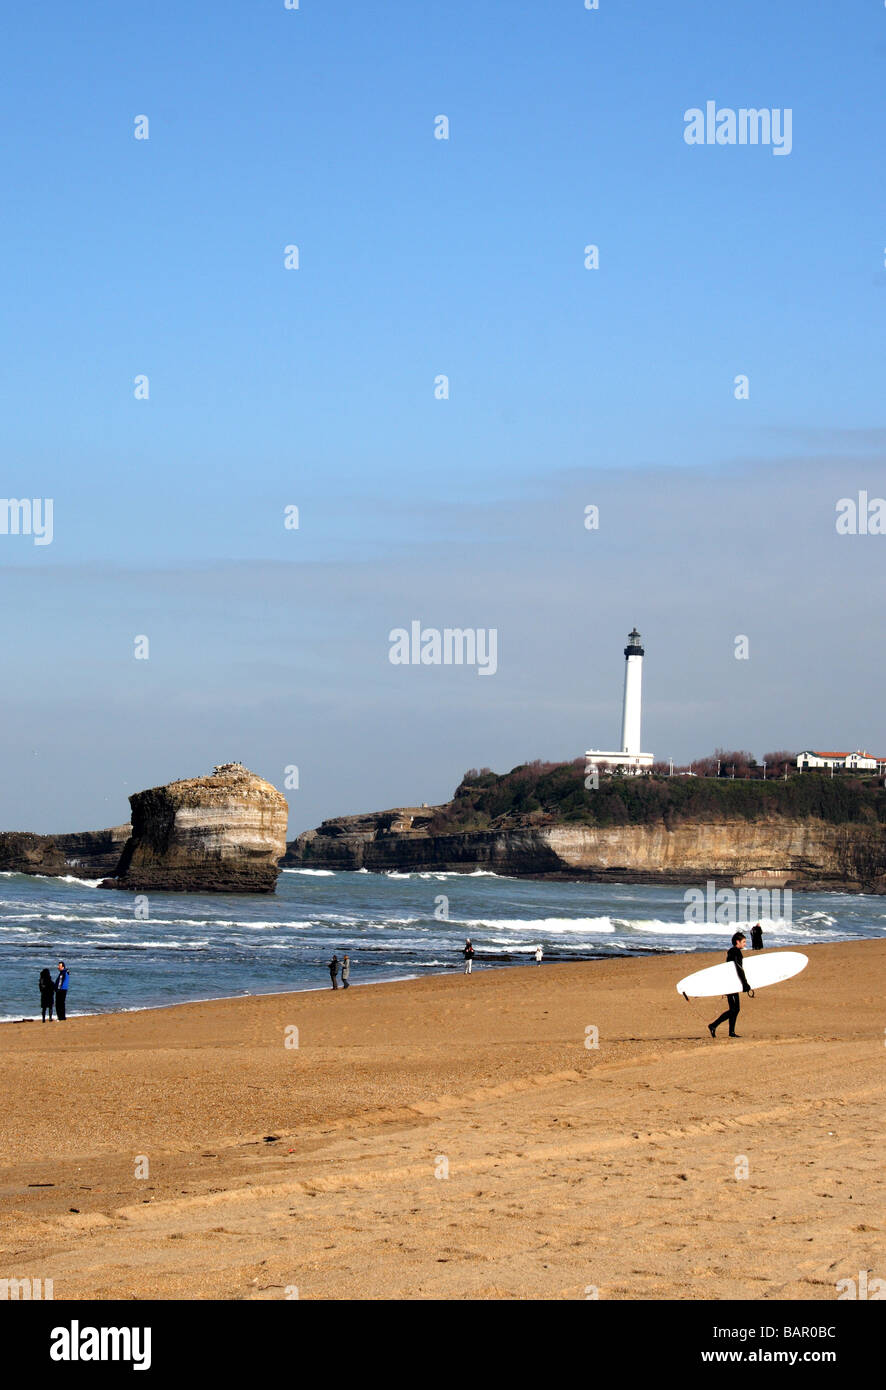 A surfer on the beach of Biarritz, in the Pays Basque region of south west France. Stock Photo